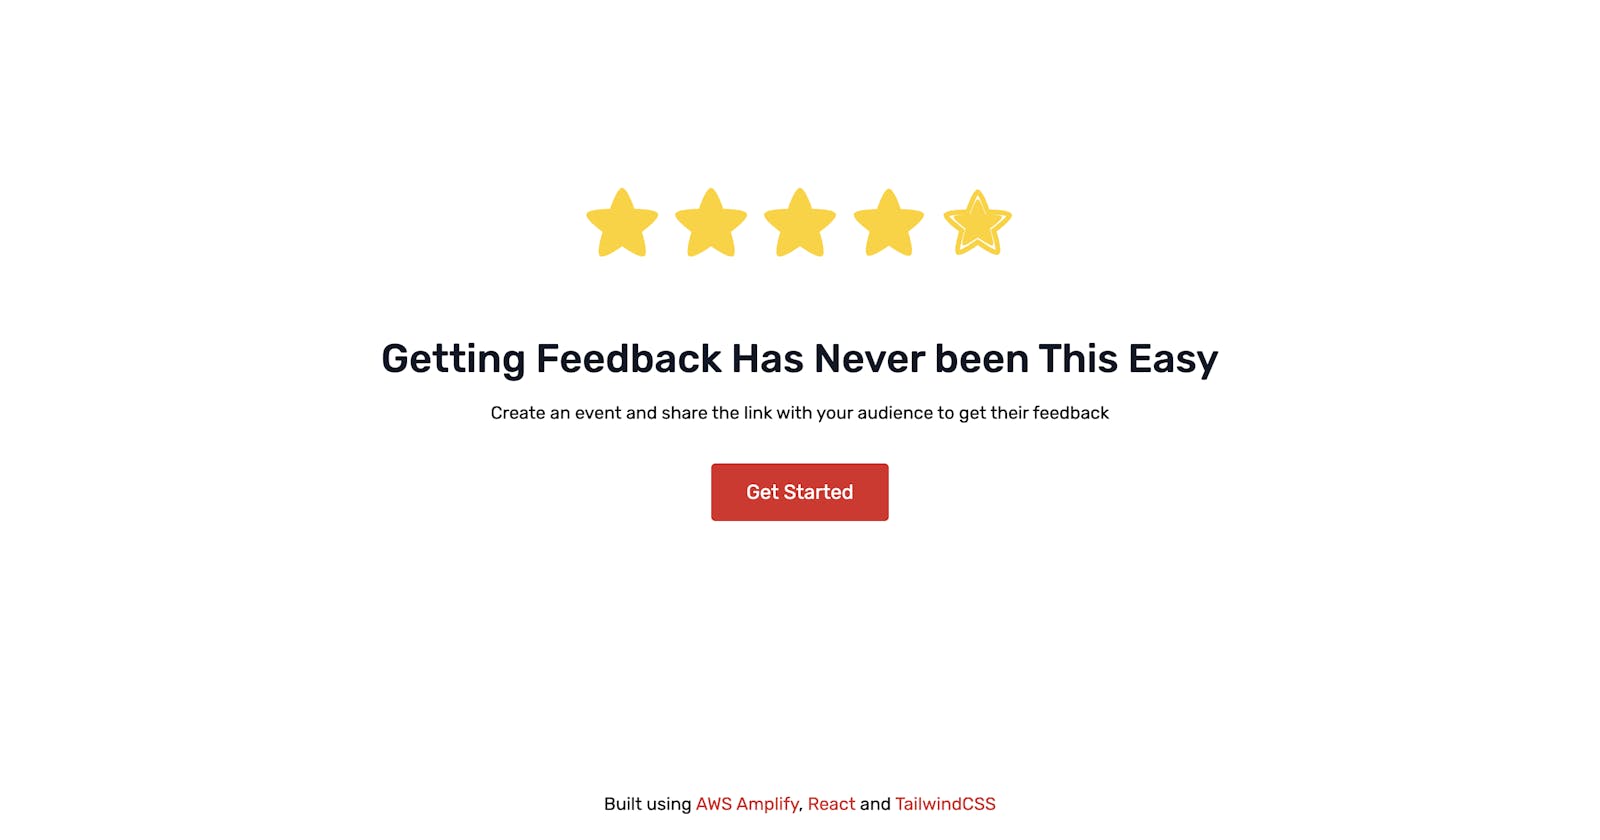 Introducing Speaker Feedback - collect anonymous feedback from your audience